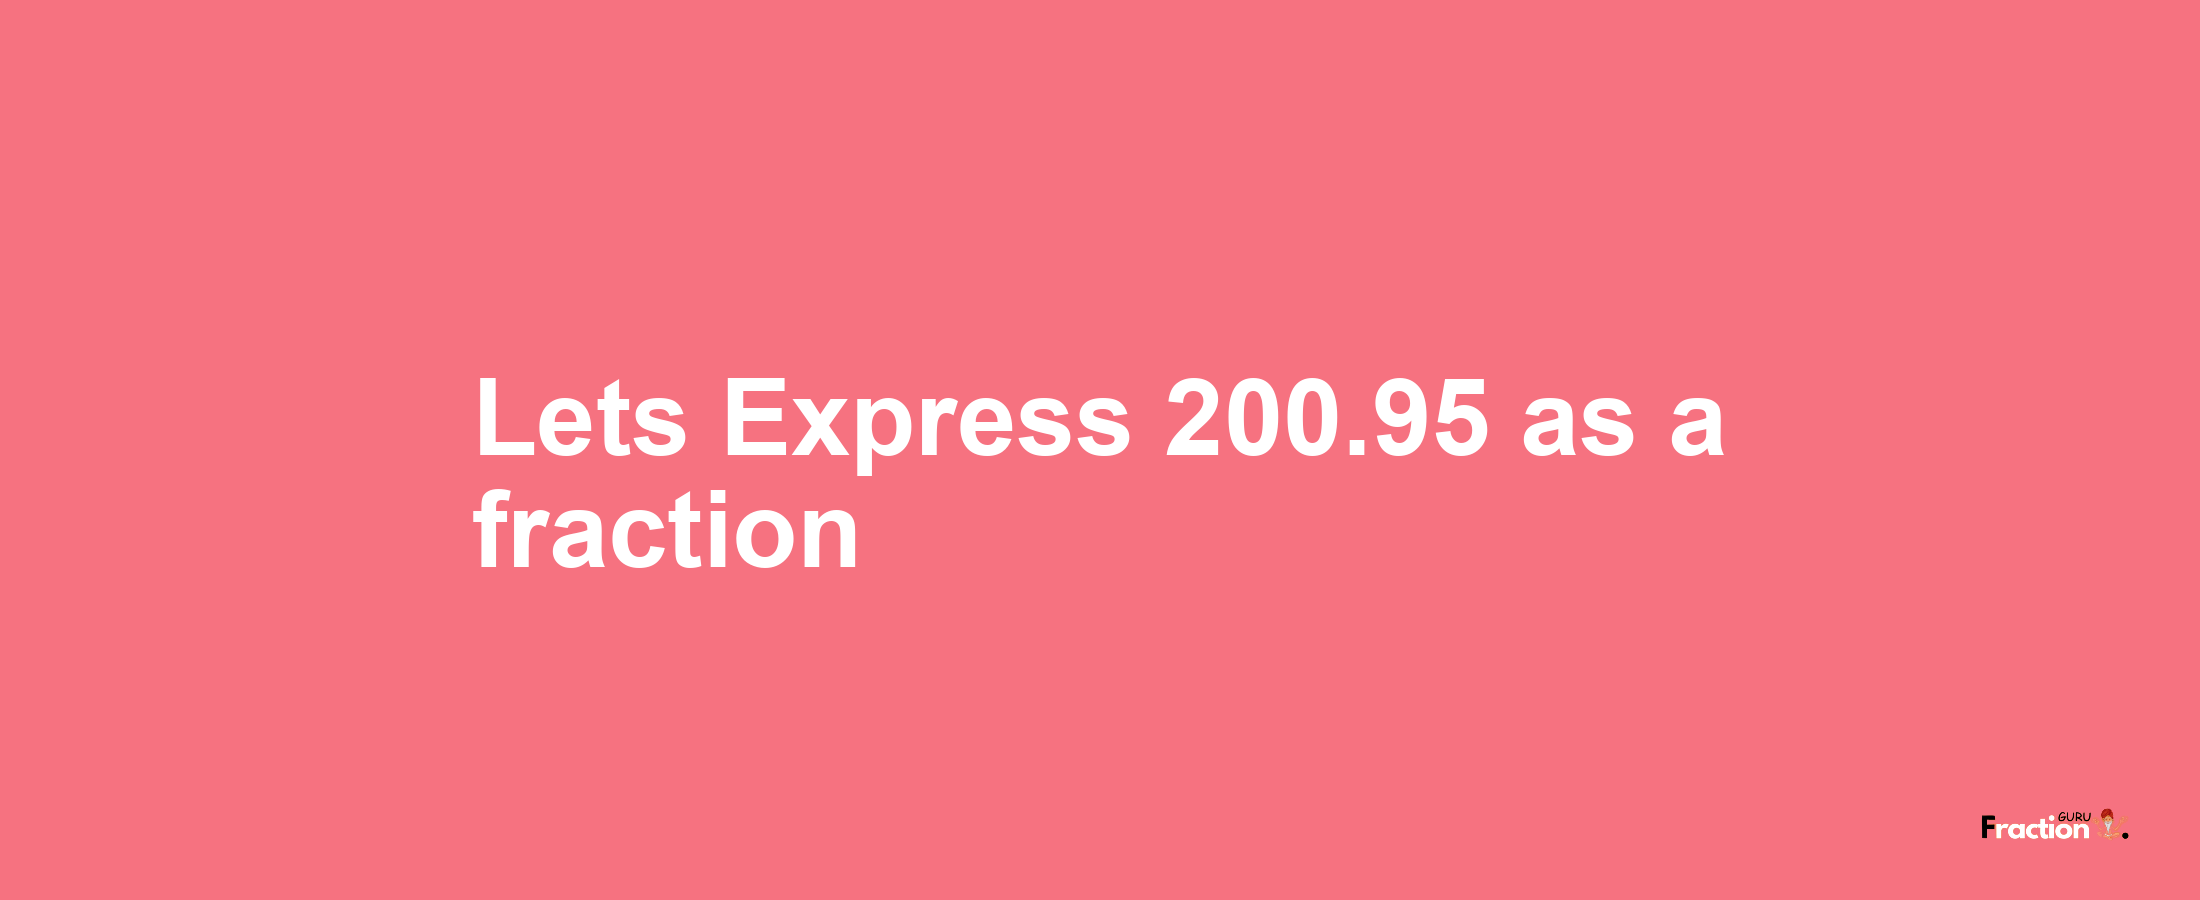 Lets Express 200.95 as afraction